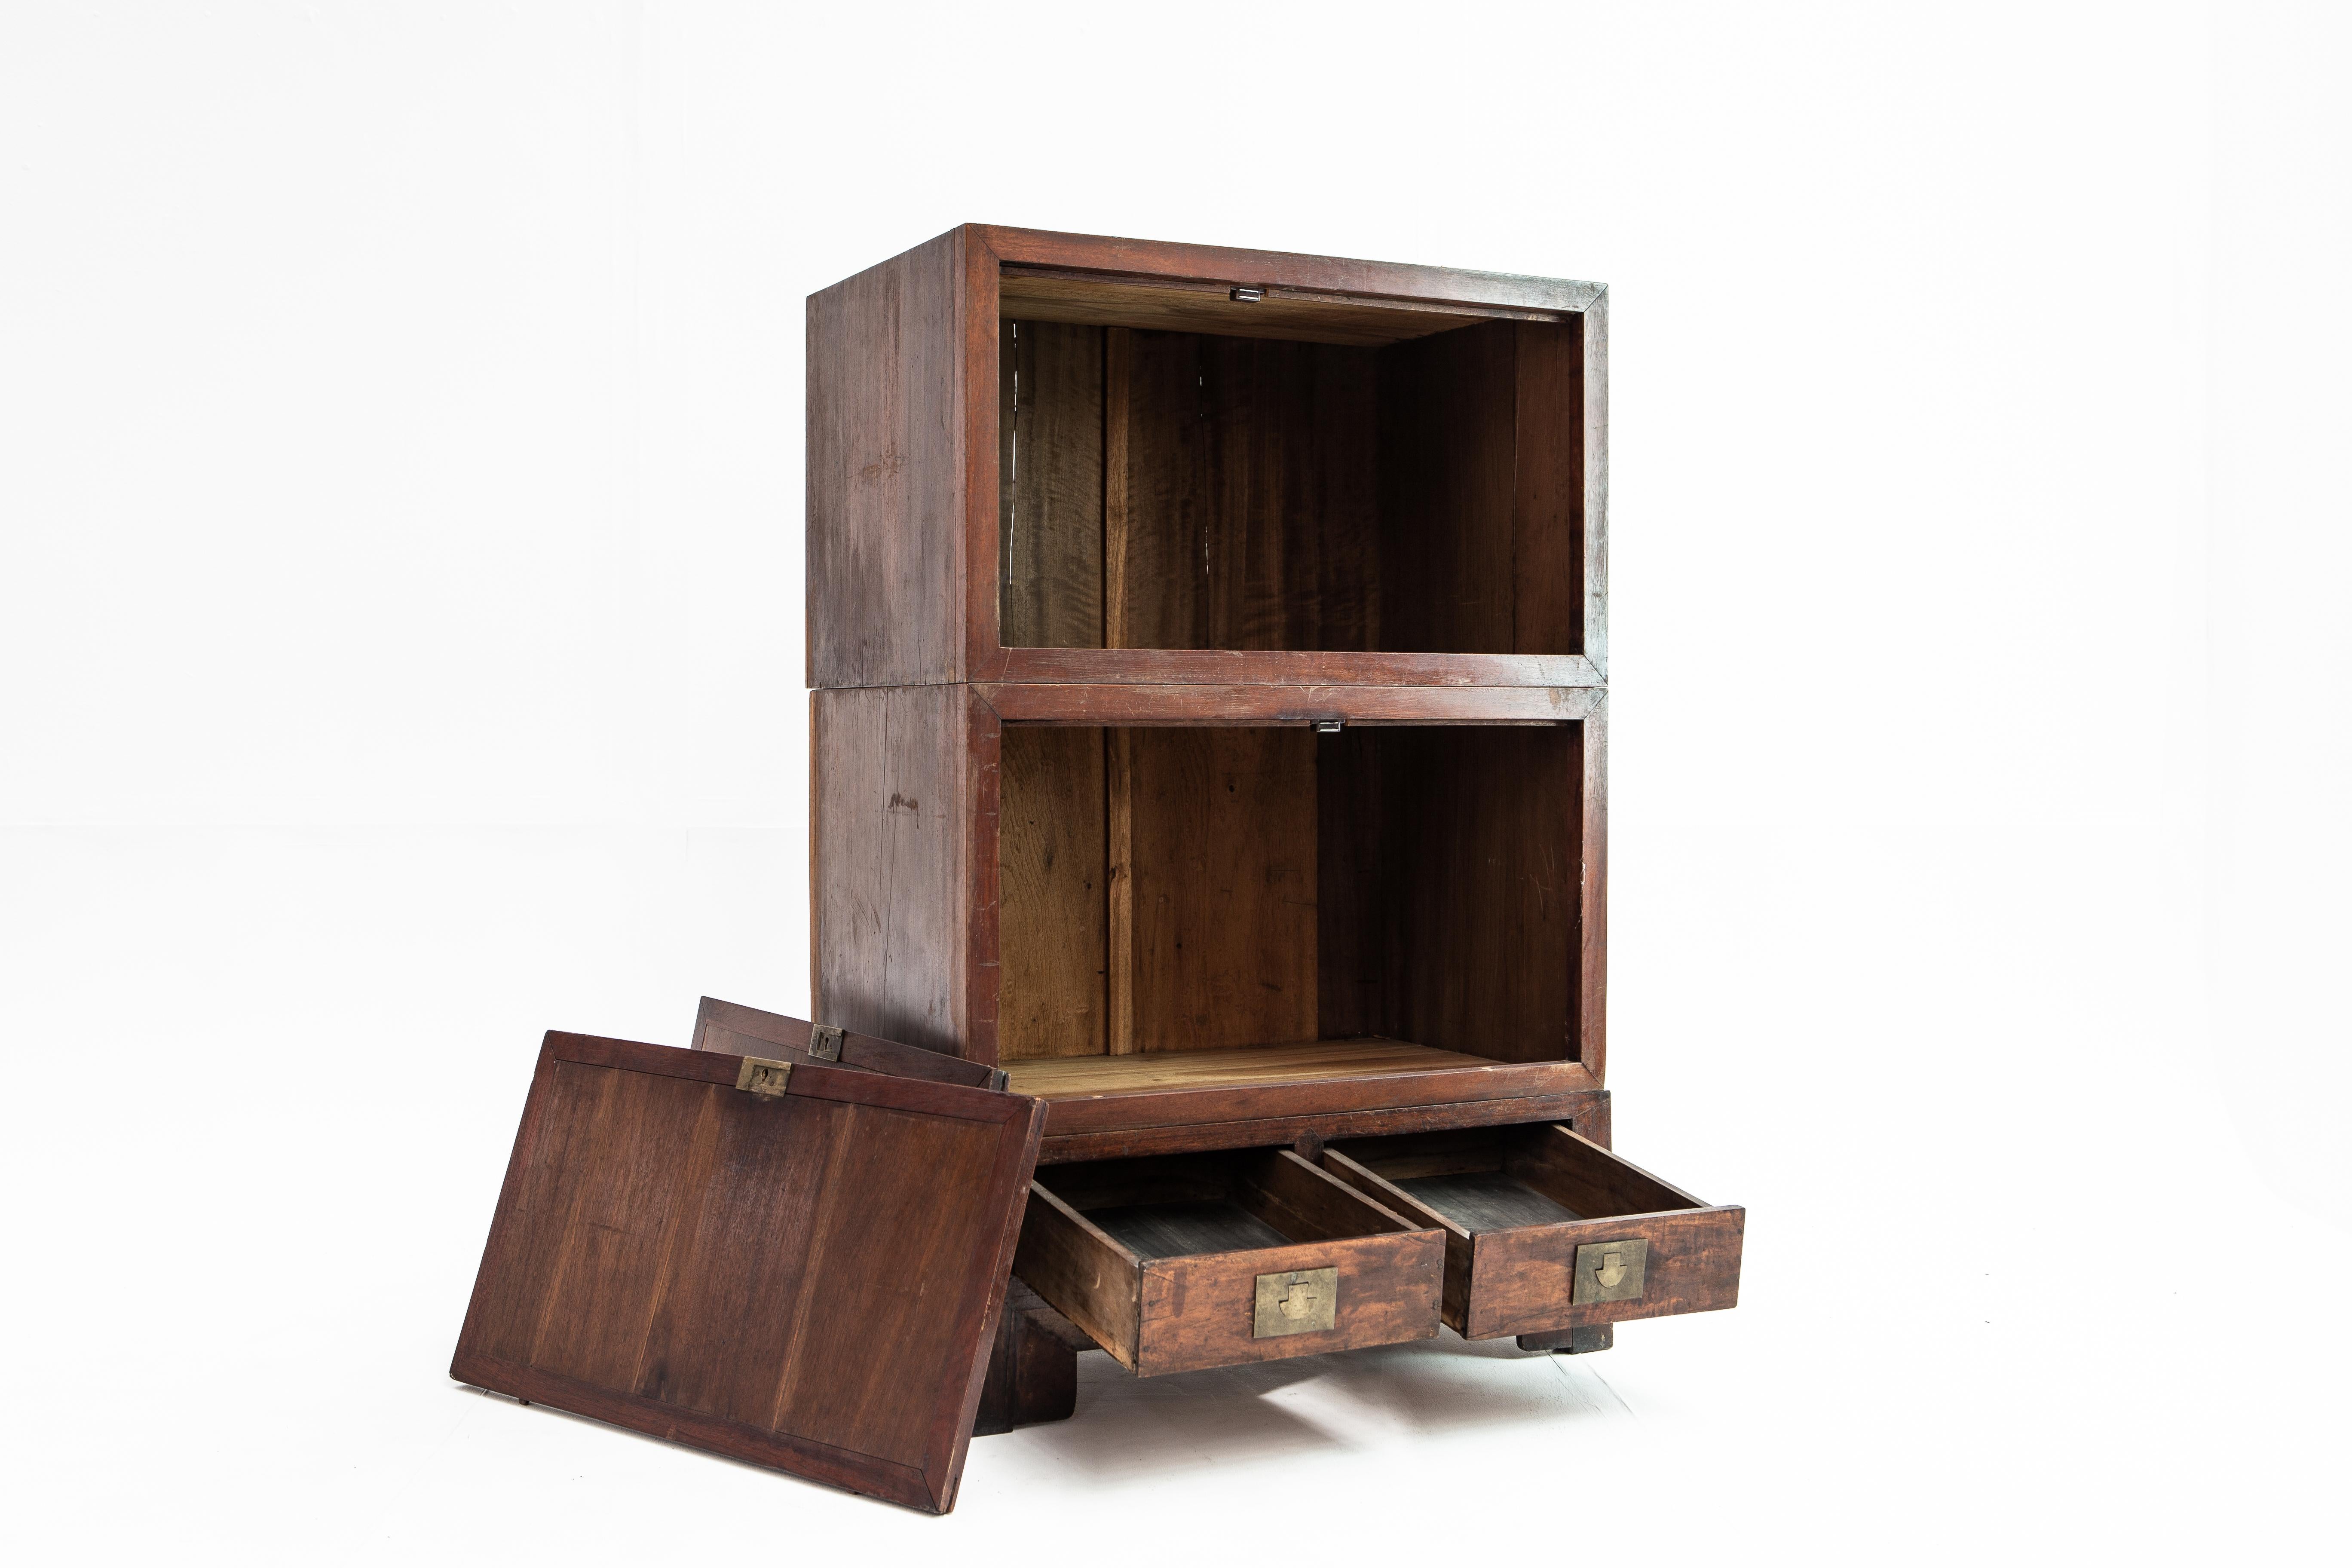 This three-piece cabinet was likely intended to hold books, as bookshelves were an important element in a Chinese scholar’s library. The clean lines are enhanced by simple hardware and the piece’s original patina. Two drawers provide additional